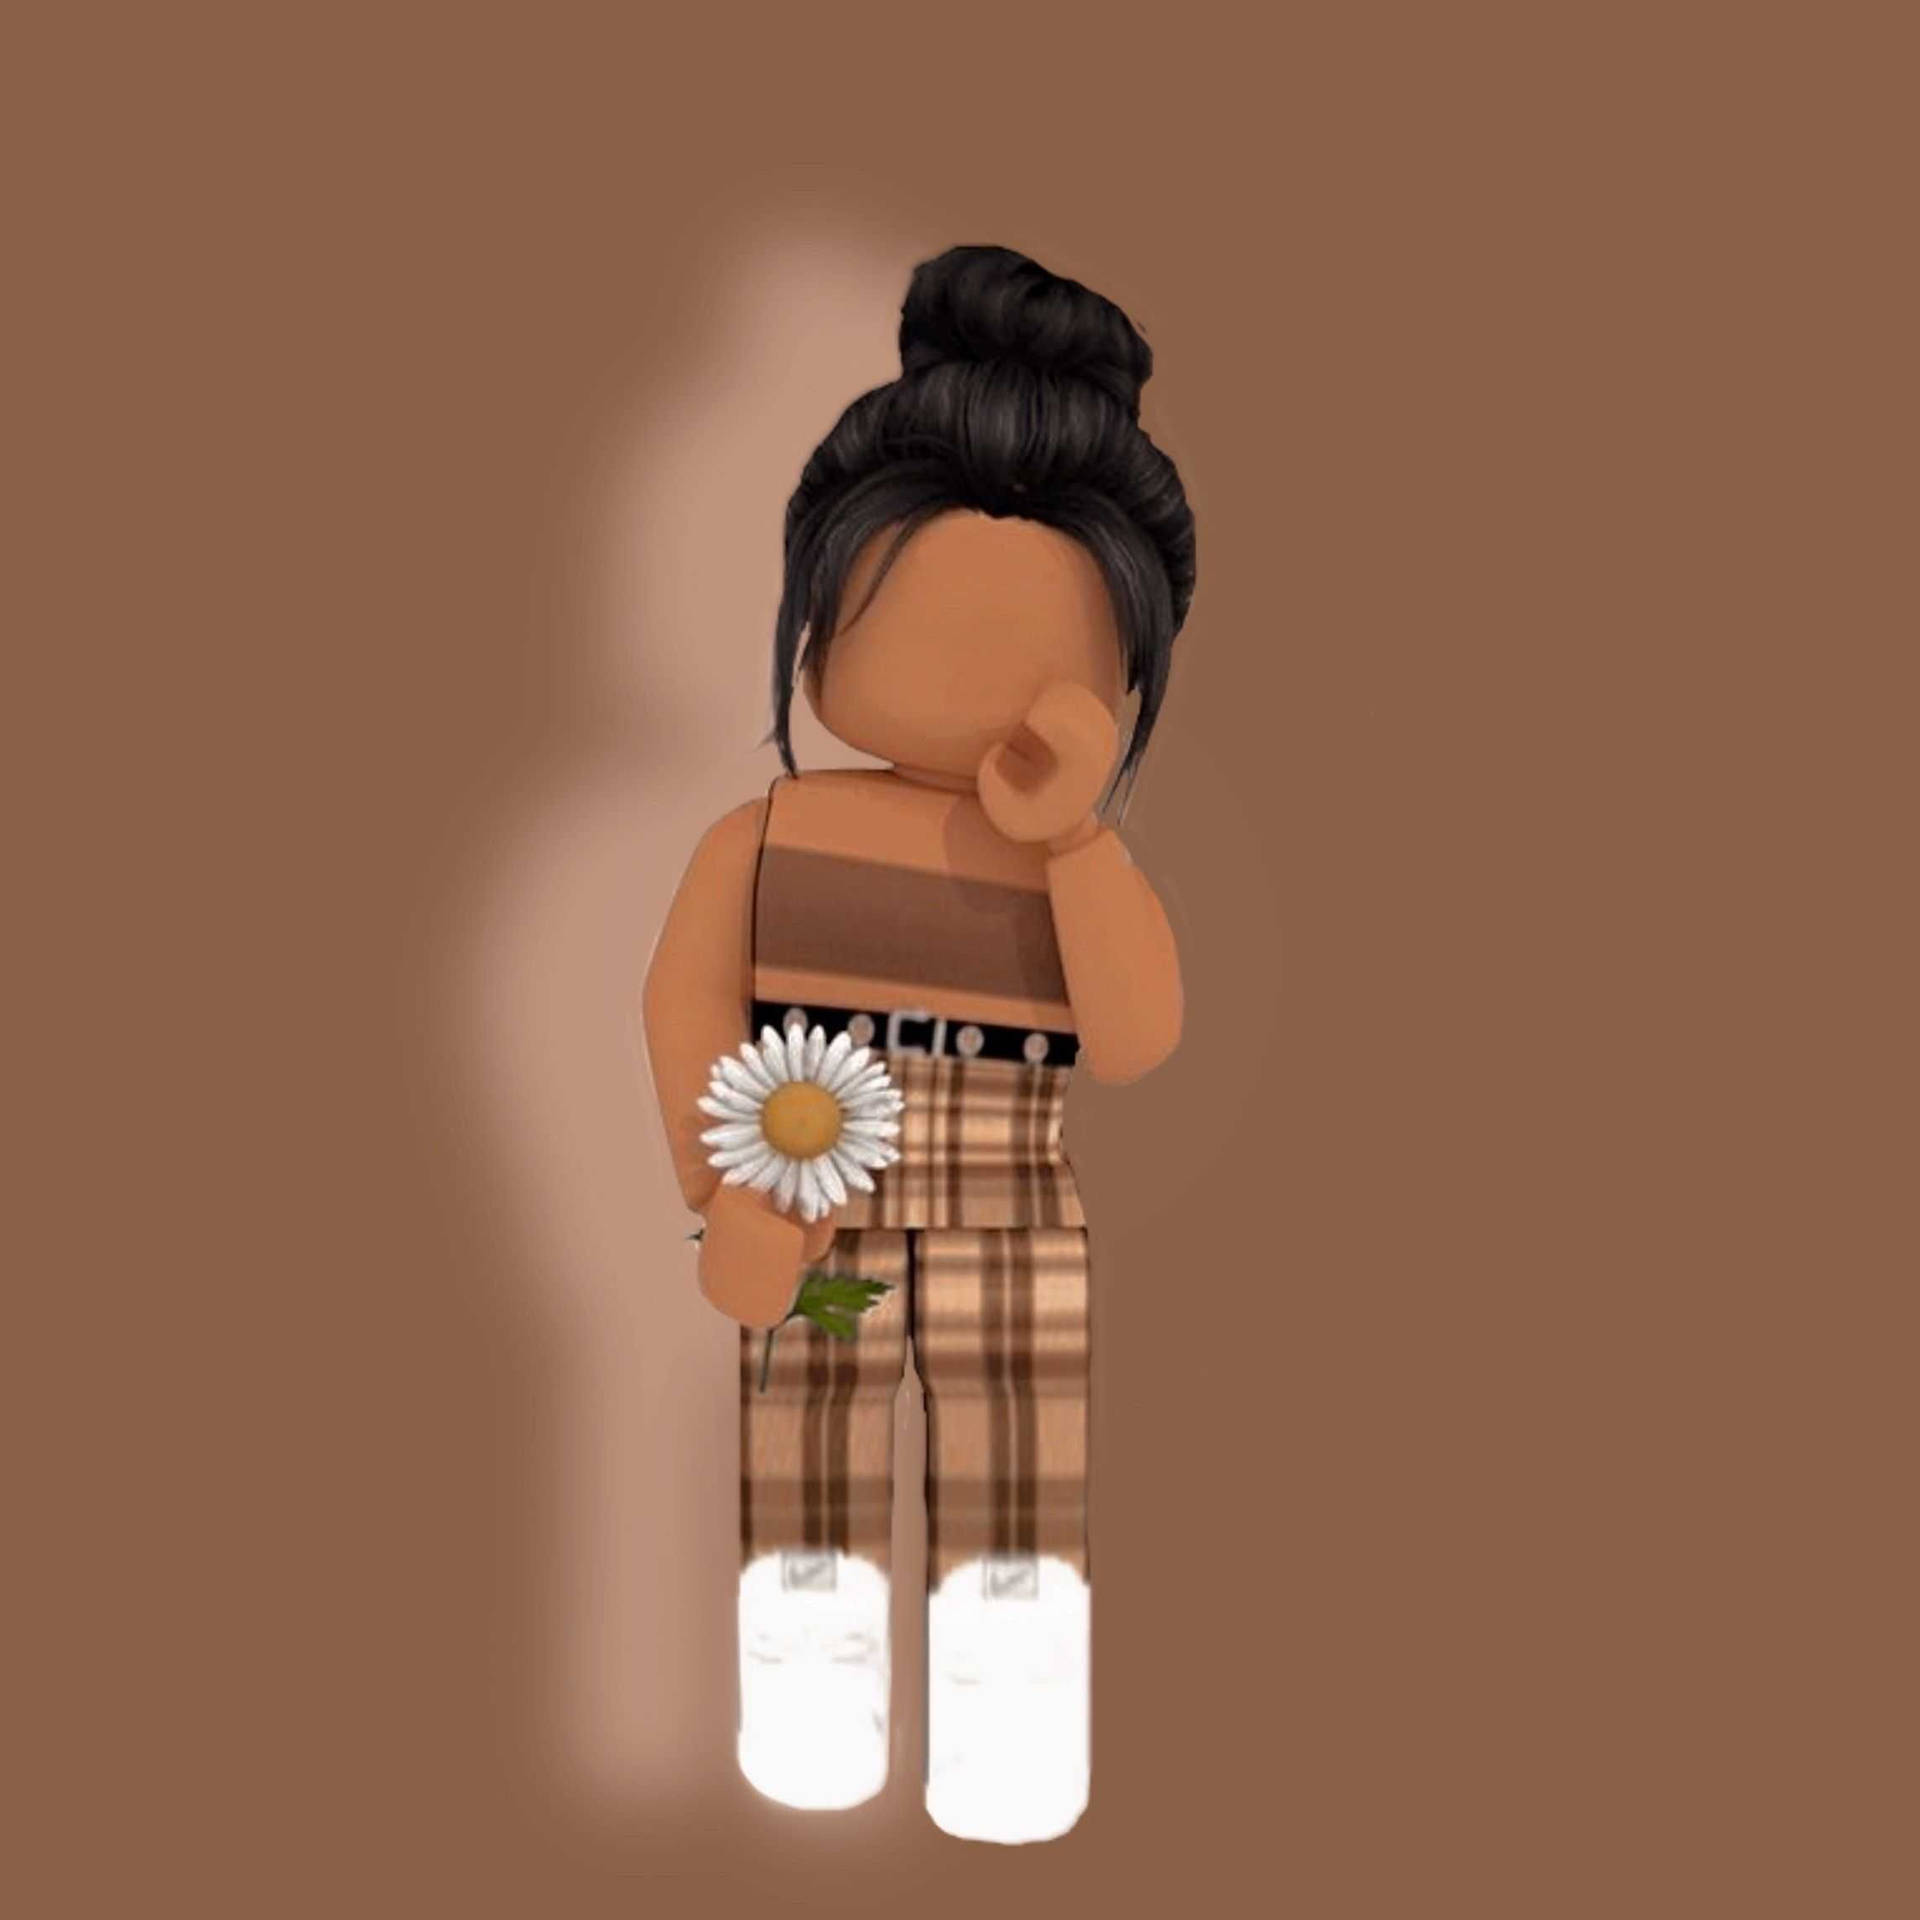 Caption: Exquisite Roblox Avatar with Brown Theme Wallpaper